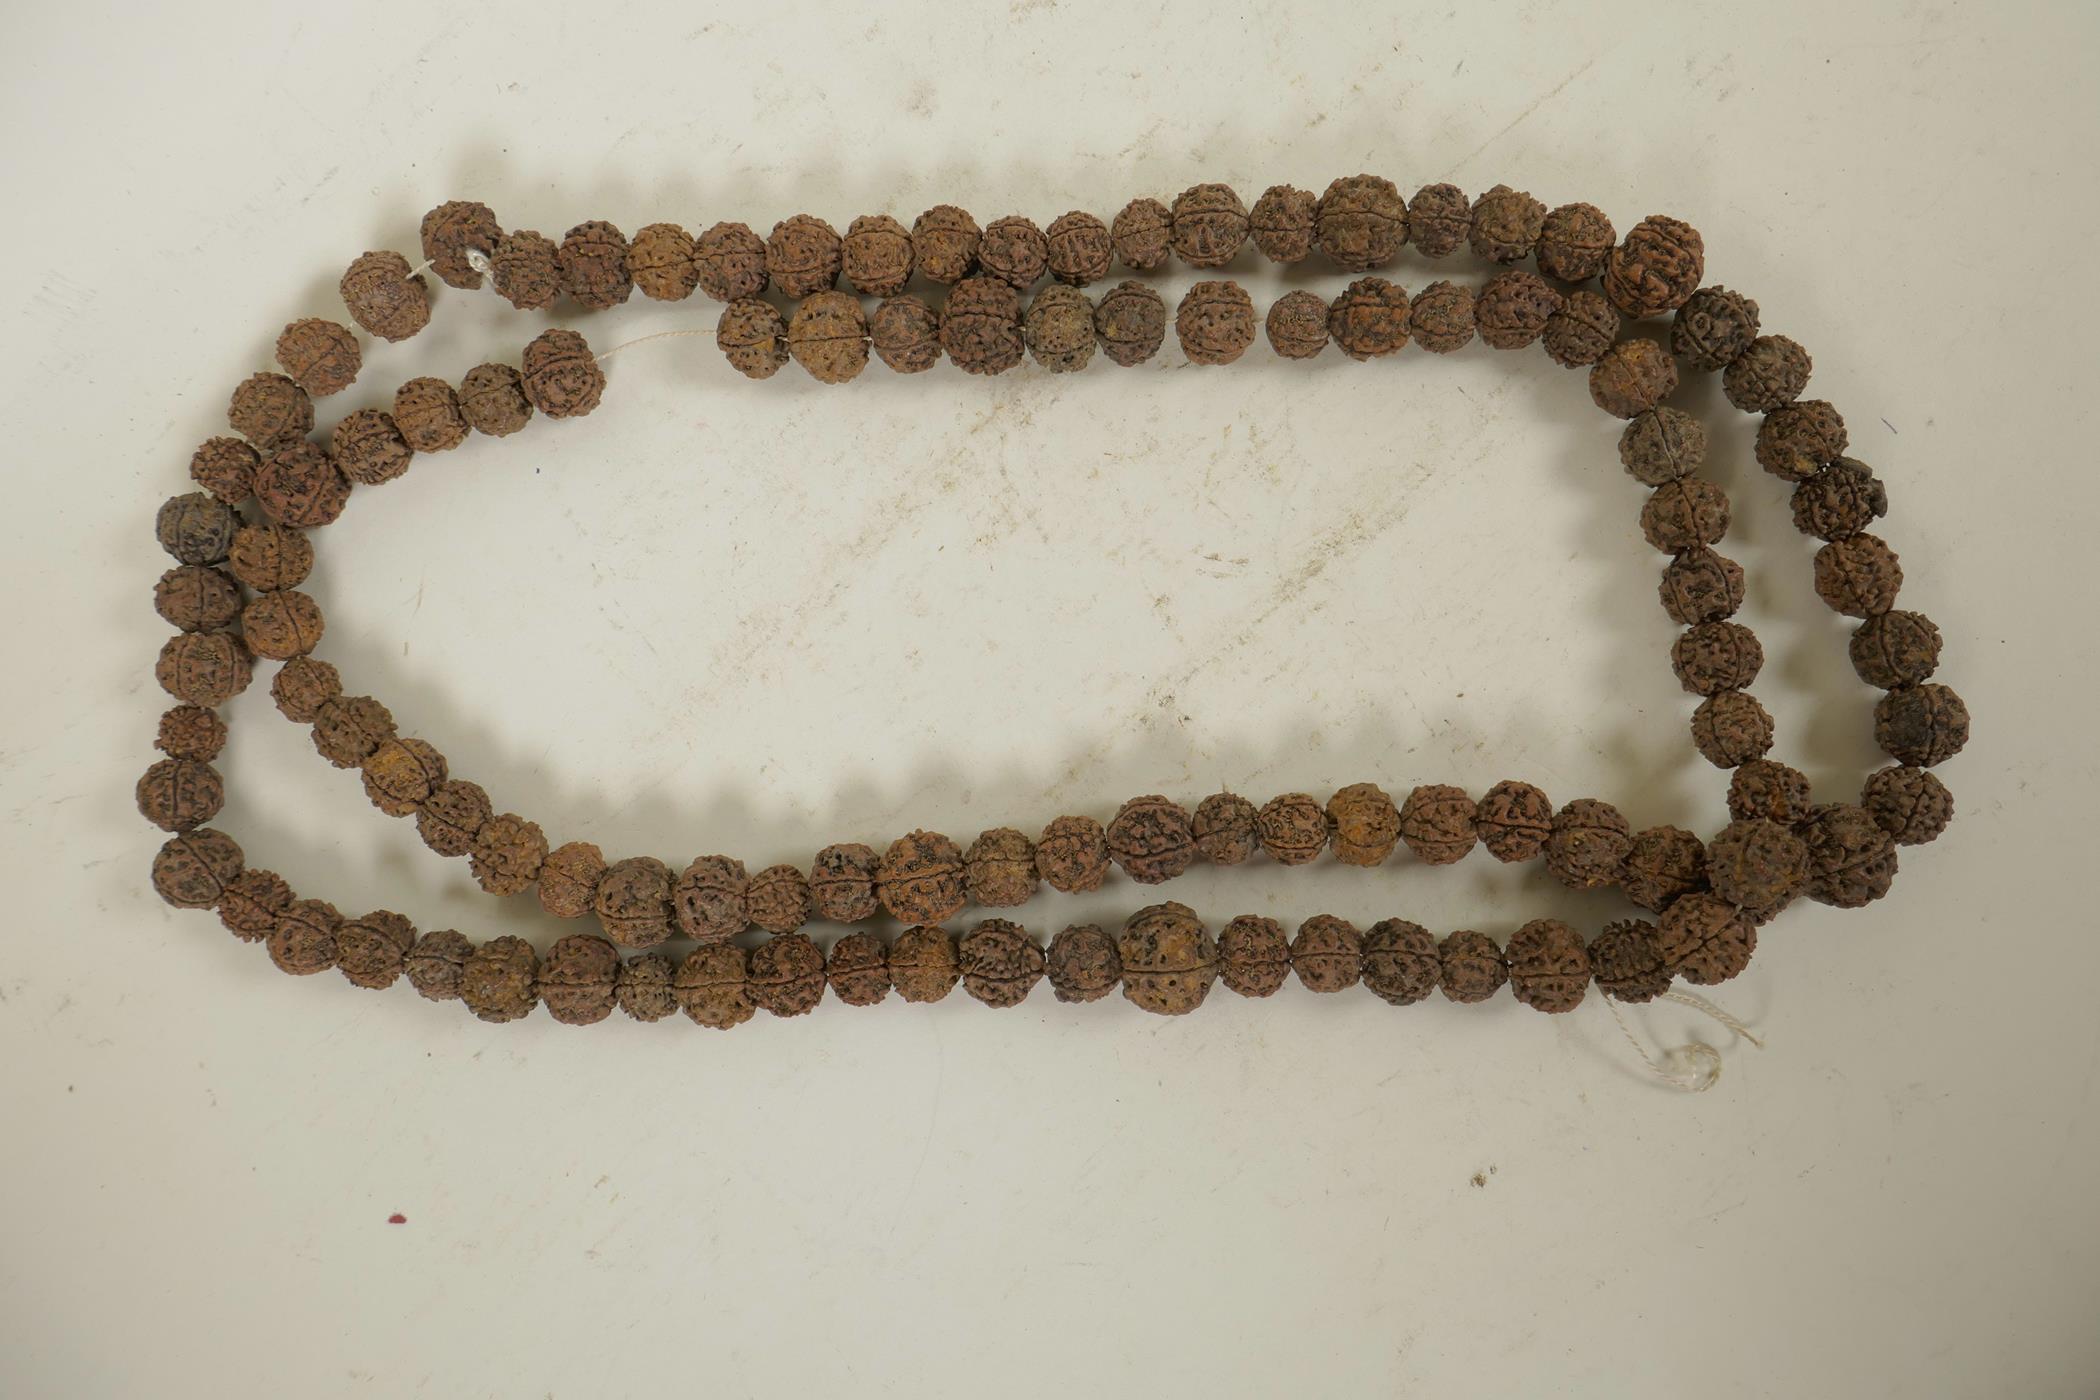 A string of nut kernel beads, 66" long